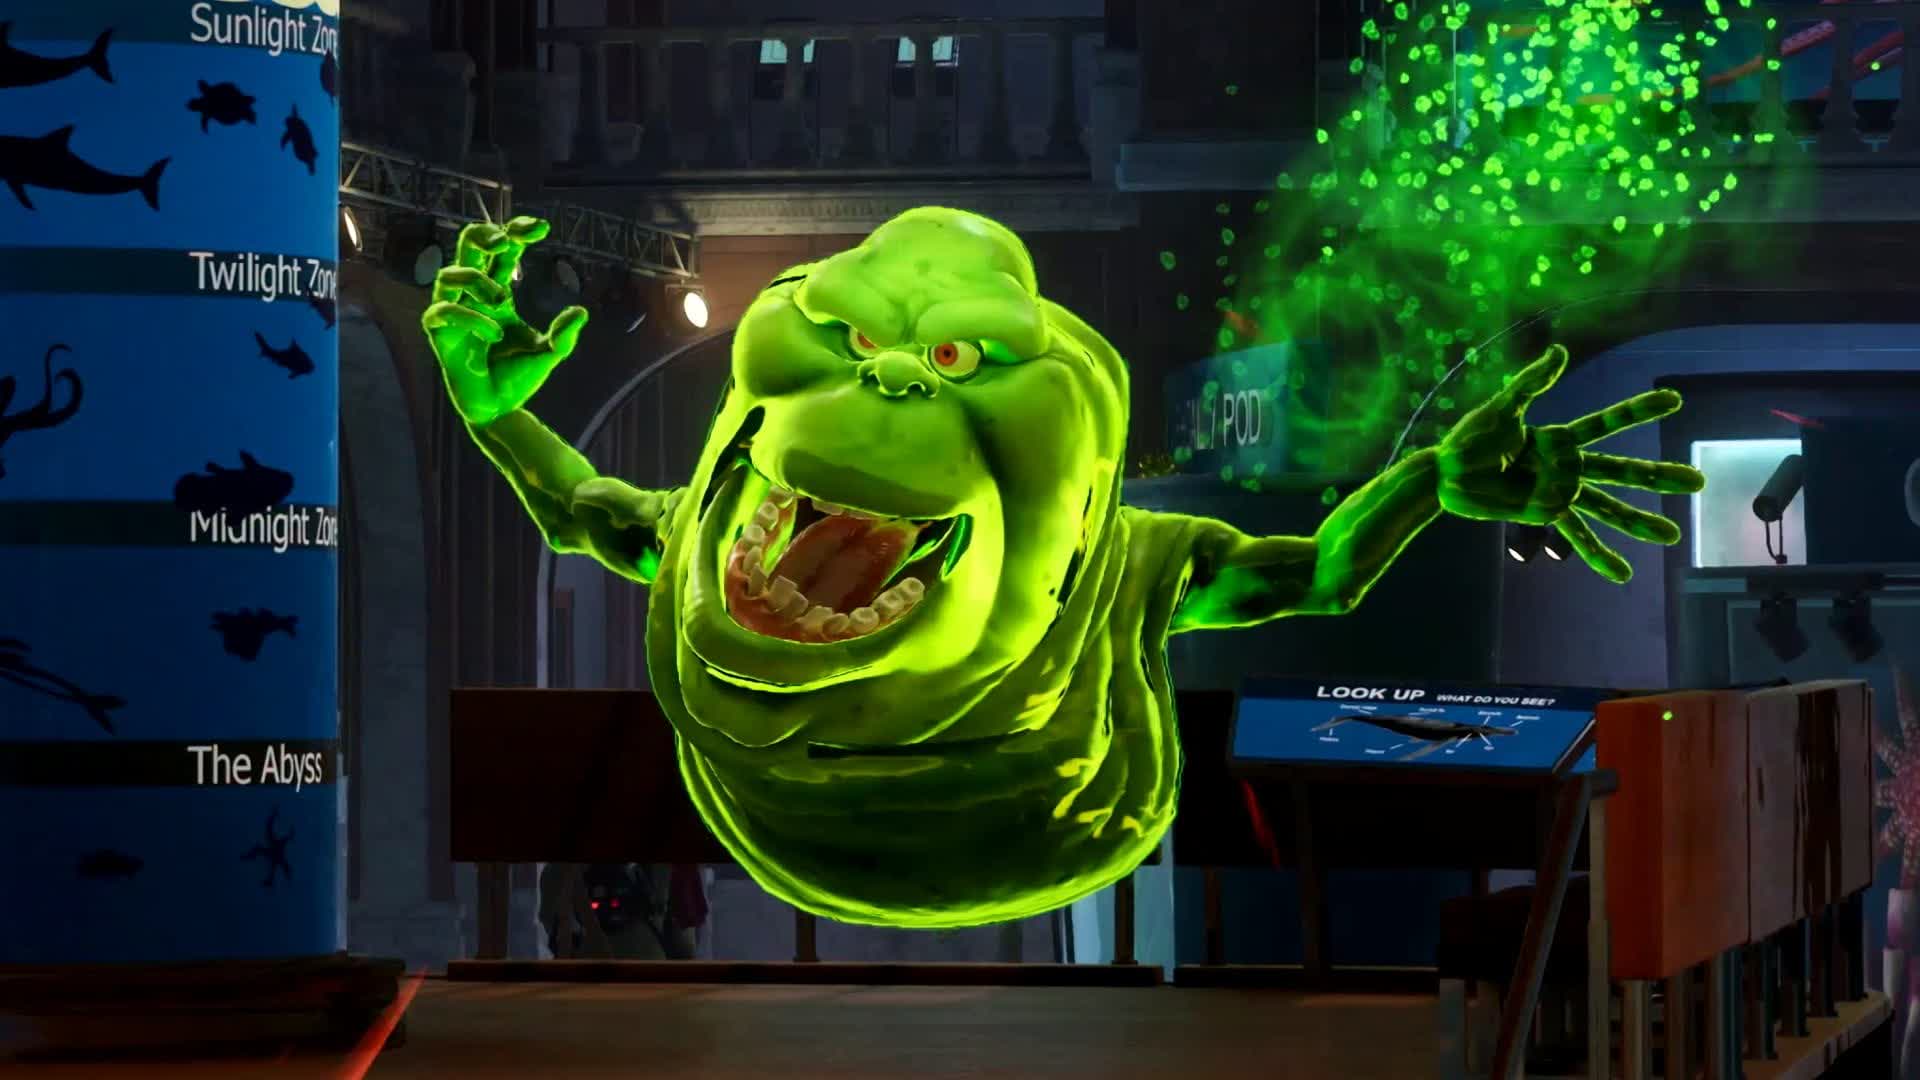 Ghostbusters: Spirits Unleashed is a 4v1 asymmetrical multiplayer game launching later this year